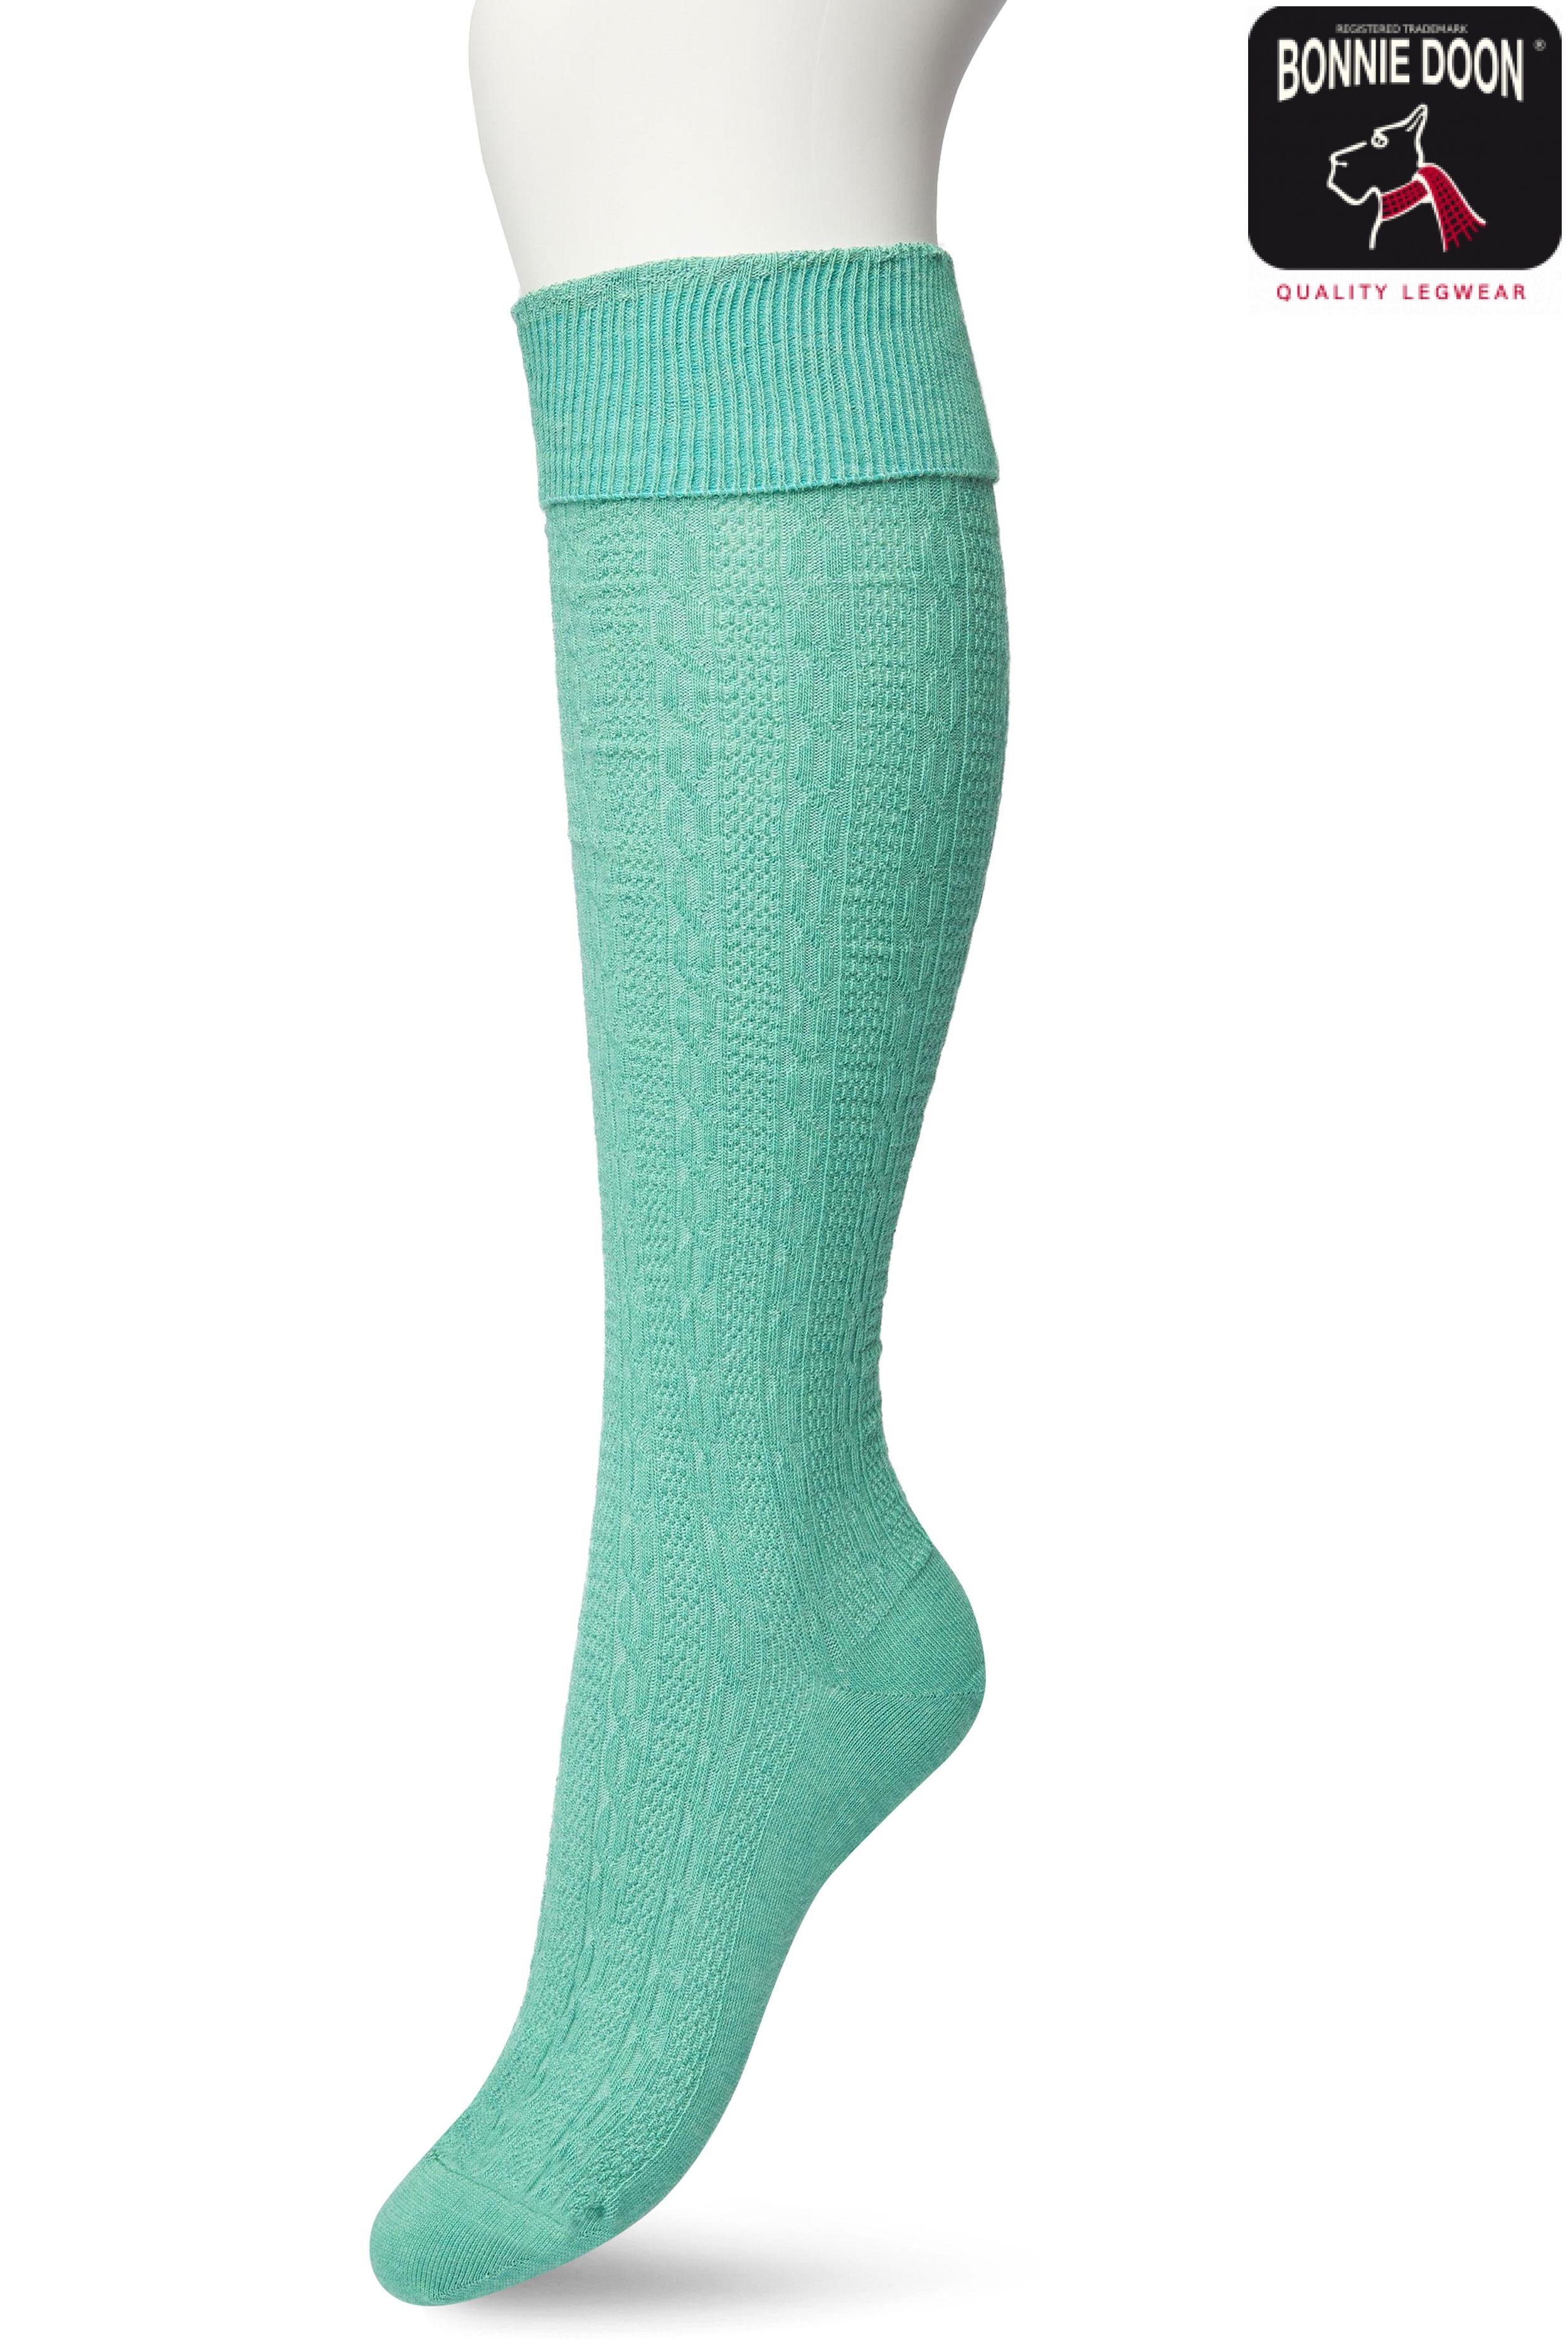 Classic Cable knee high Malachite green